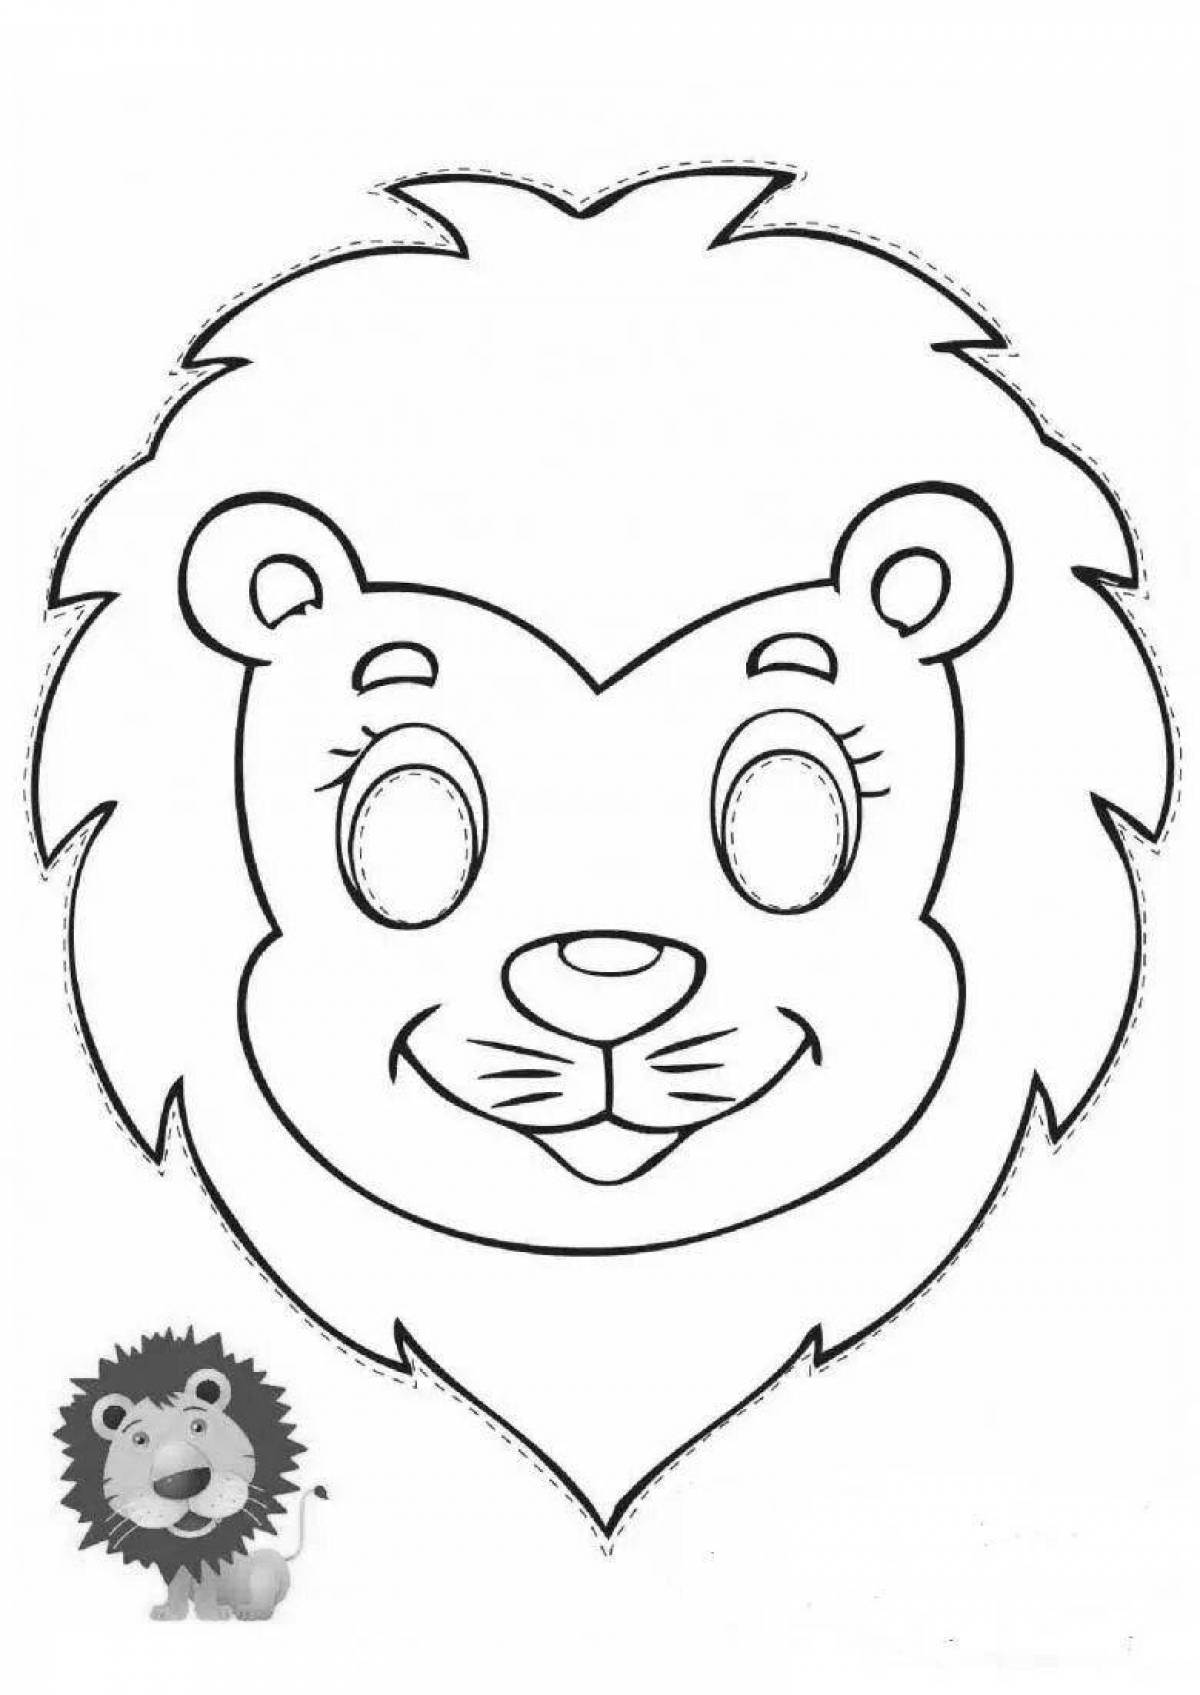 Adorable lion pattern coloring page